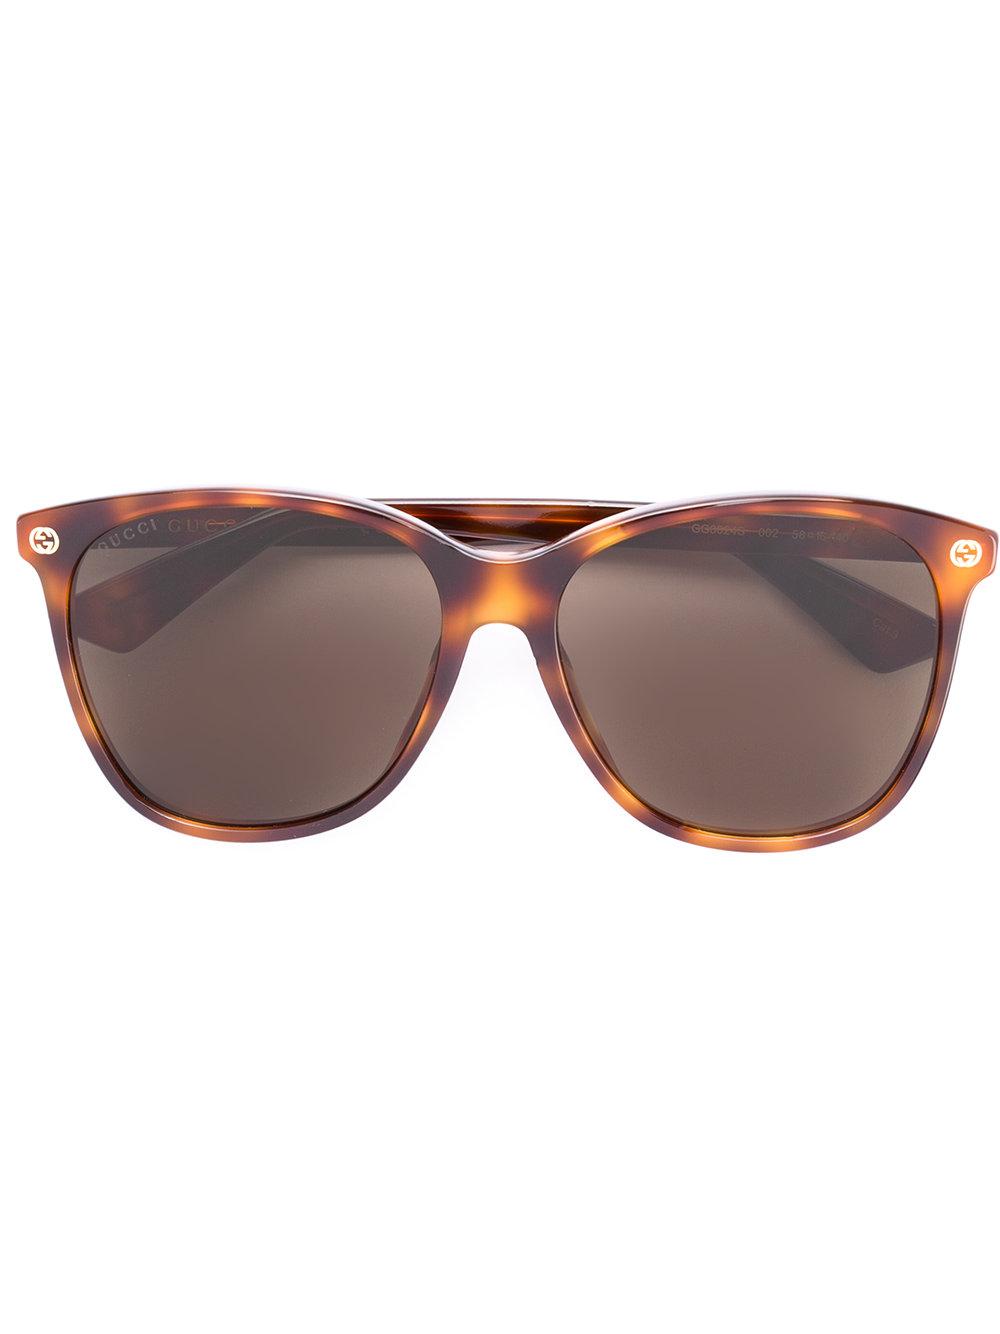 Gucci Oversize Gradient Round Sunglasses in Brown | Lyst